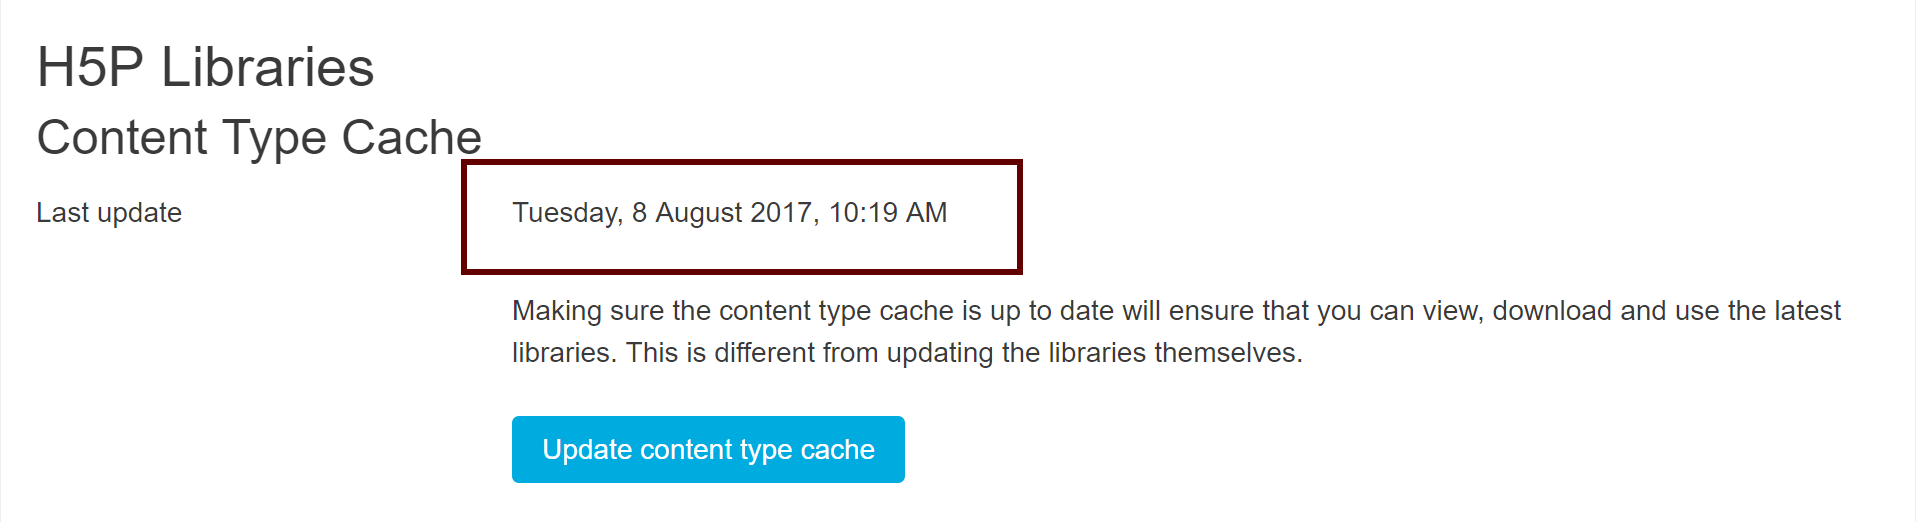 Image showing when Content Type Cache was last updated in Moodle